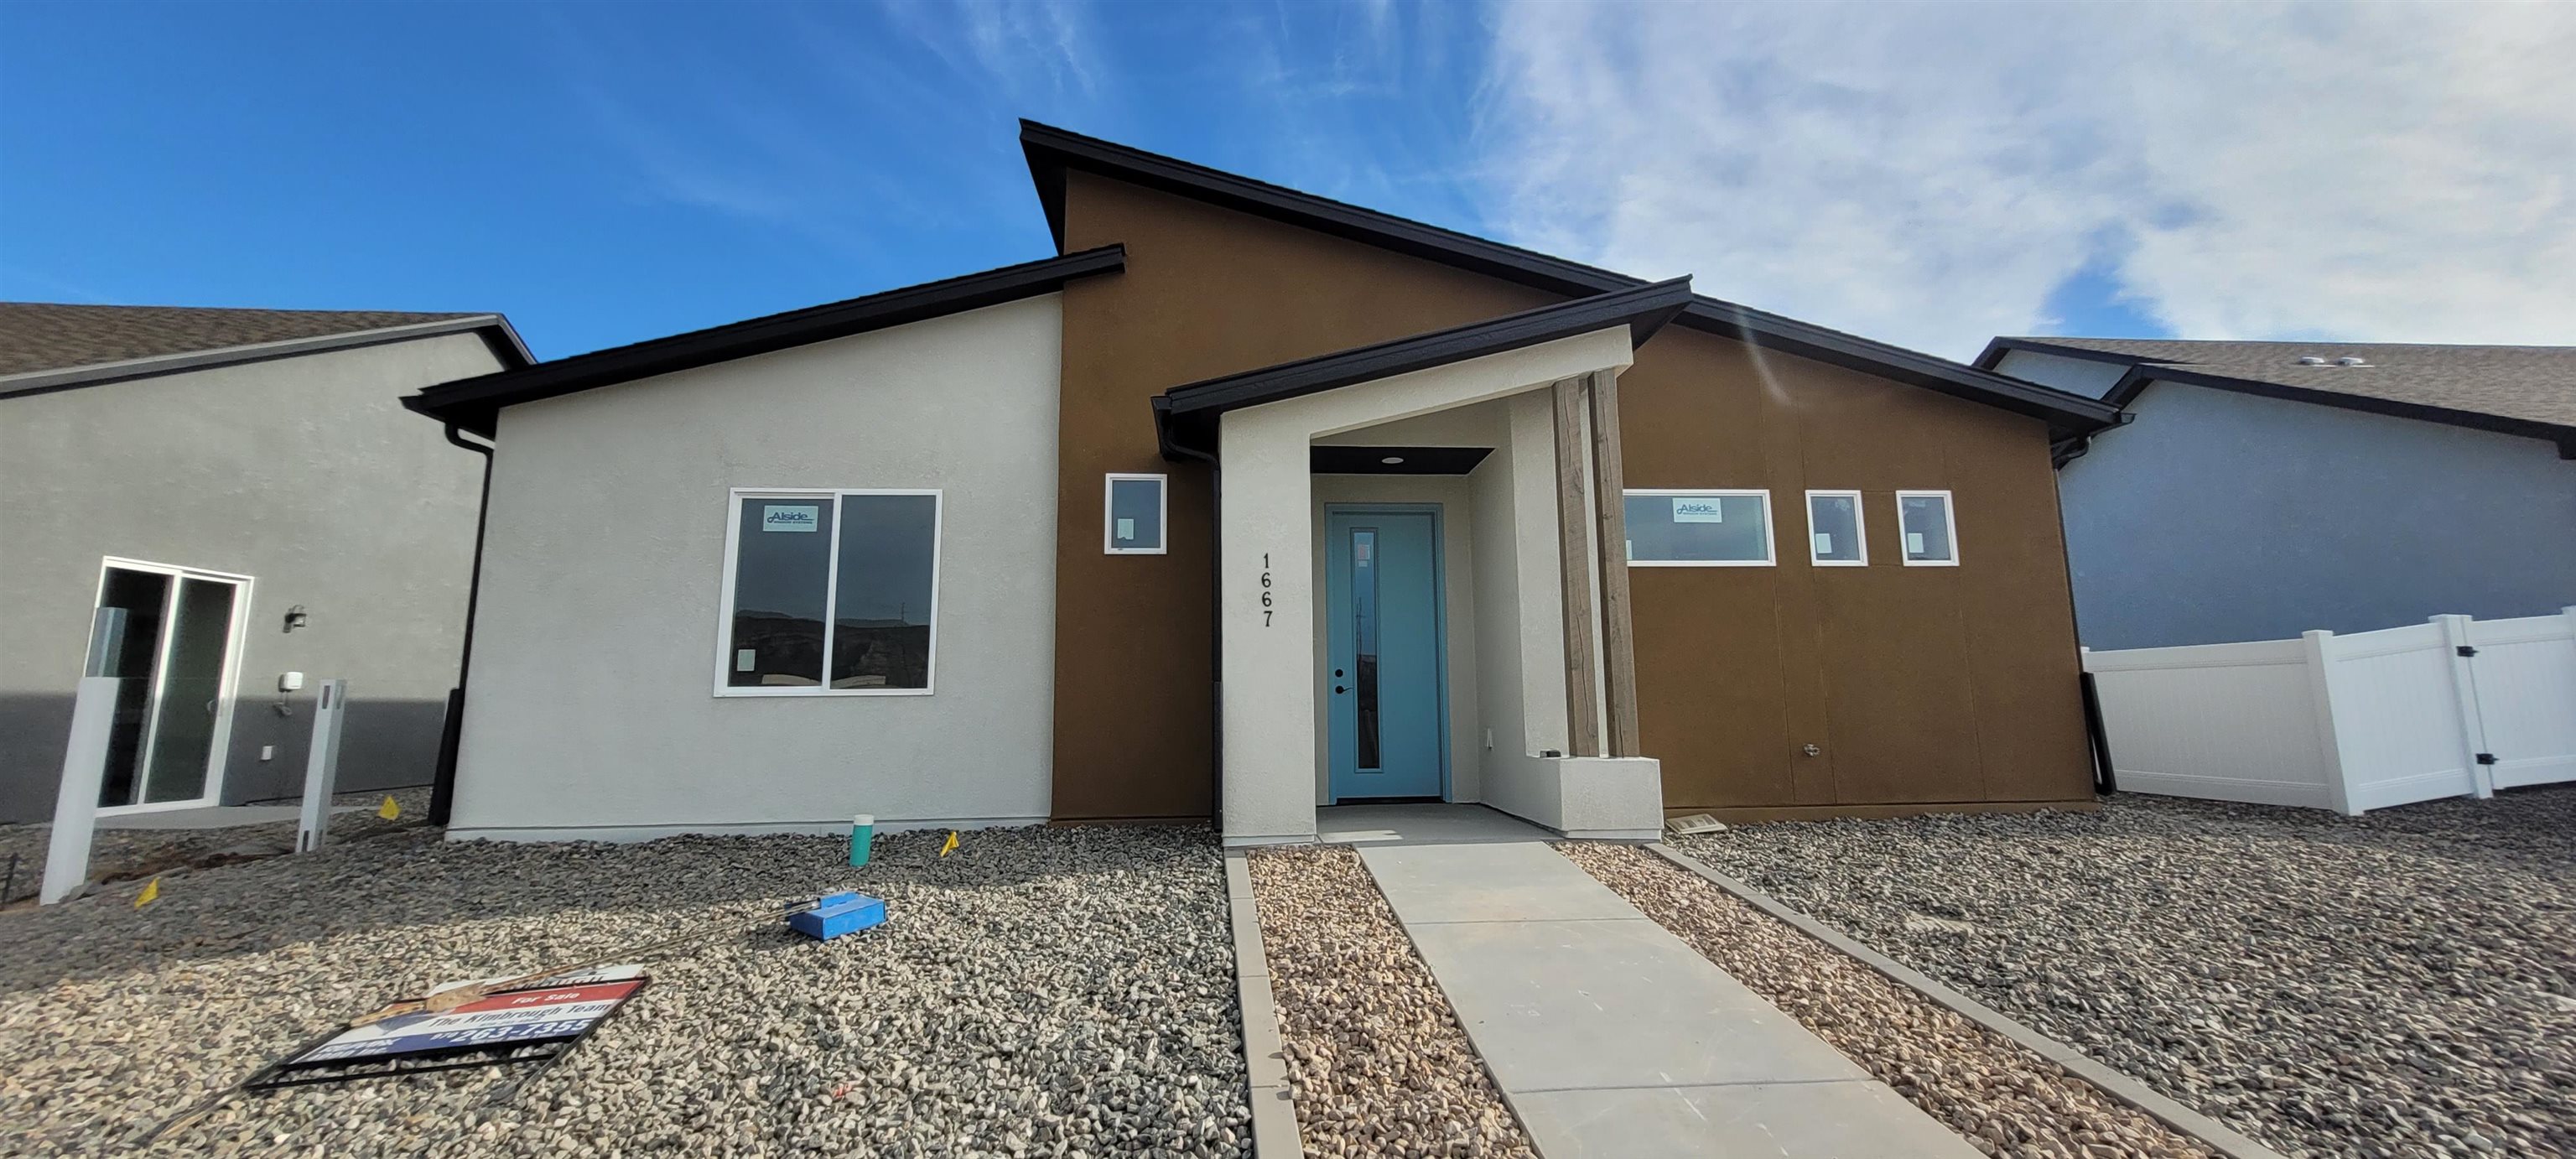 Welcome to Iron Wheel subdivision where affordability meets function! Brand new home with 1% closing costs through Seller's preferred lender (call for details). This one-of-a-kind community will have a wide variety of home types and sizes, a walking path to FMHS & easy access to both GJ & Fruita. Pricing includes xeriscaping & fencing. These well-planned homes offer maximum functional use of space, durable yet beautiful finishes & cute outdoor living spaces that require minimal maintenance. BUYER MAY HAVE TILE & FRONT DOOR COLOR OPTIONS, DEPENDING ON WHEN CONTRACTED. - Our Builder Advantage program can help you get 1% in closing costs through sellers preferred lender. Call for details. Estimated Completion 7/10/23